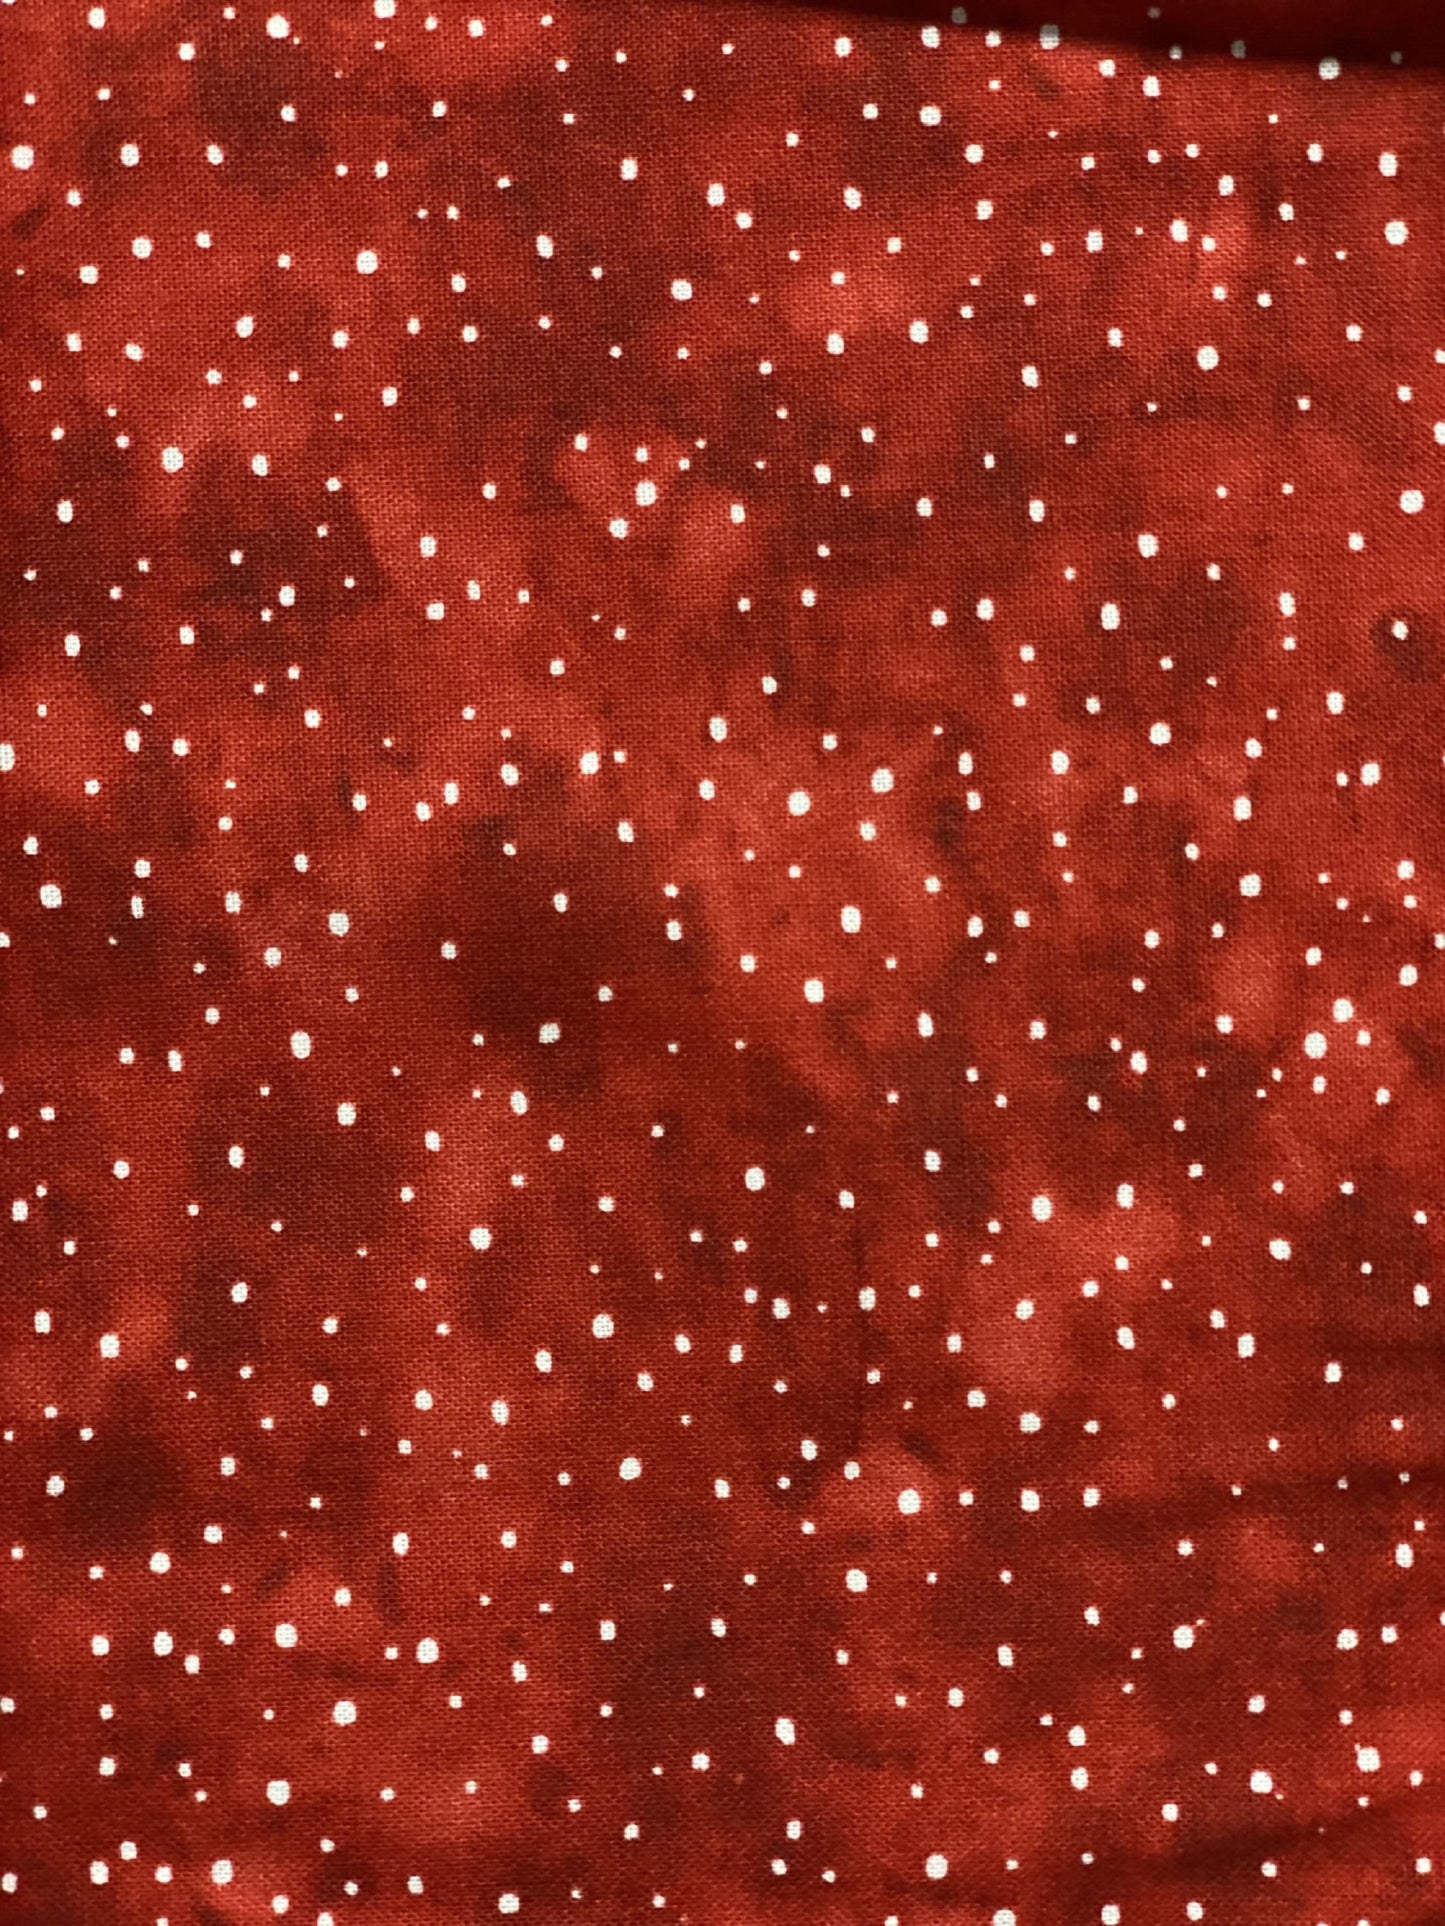 More Holiday Spirit by Henry Glass-White Dots on Red-1 Yard